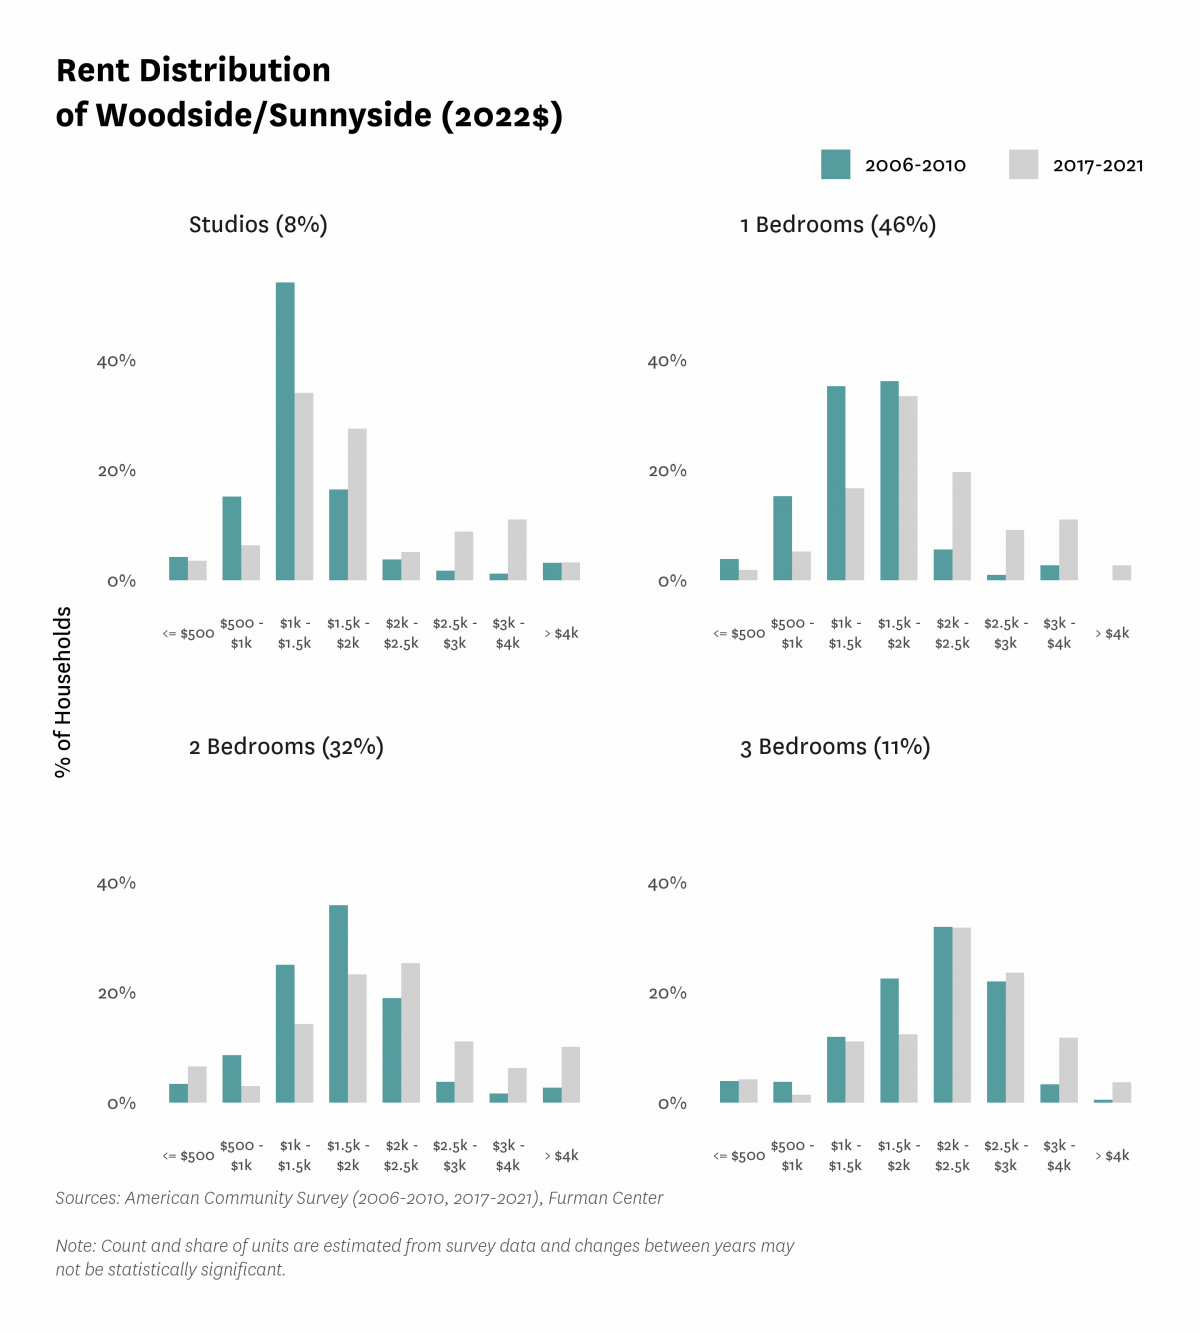 Graph showing the distribution of rents in Woodside/Sunnyside in both 2010 and 2017-2021.